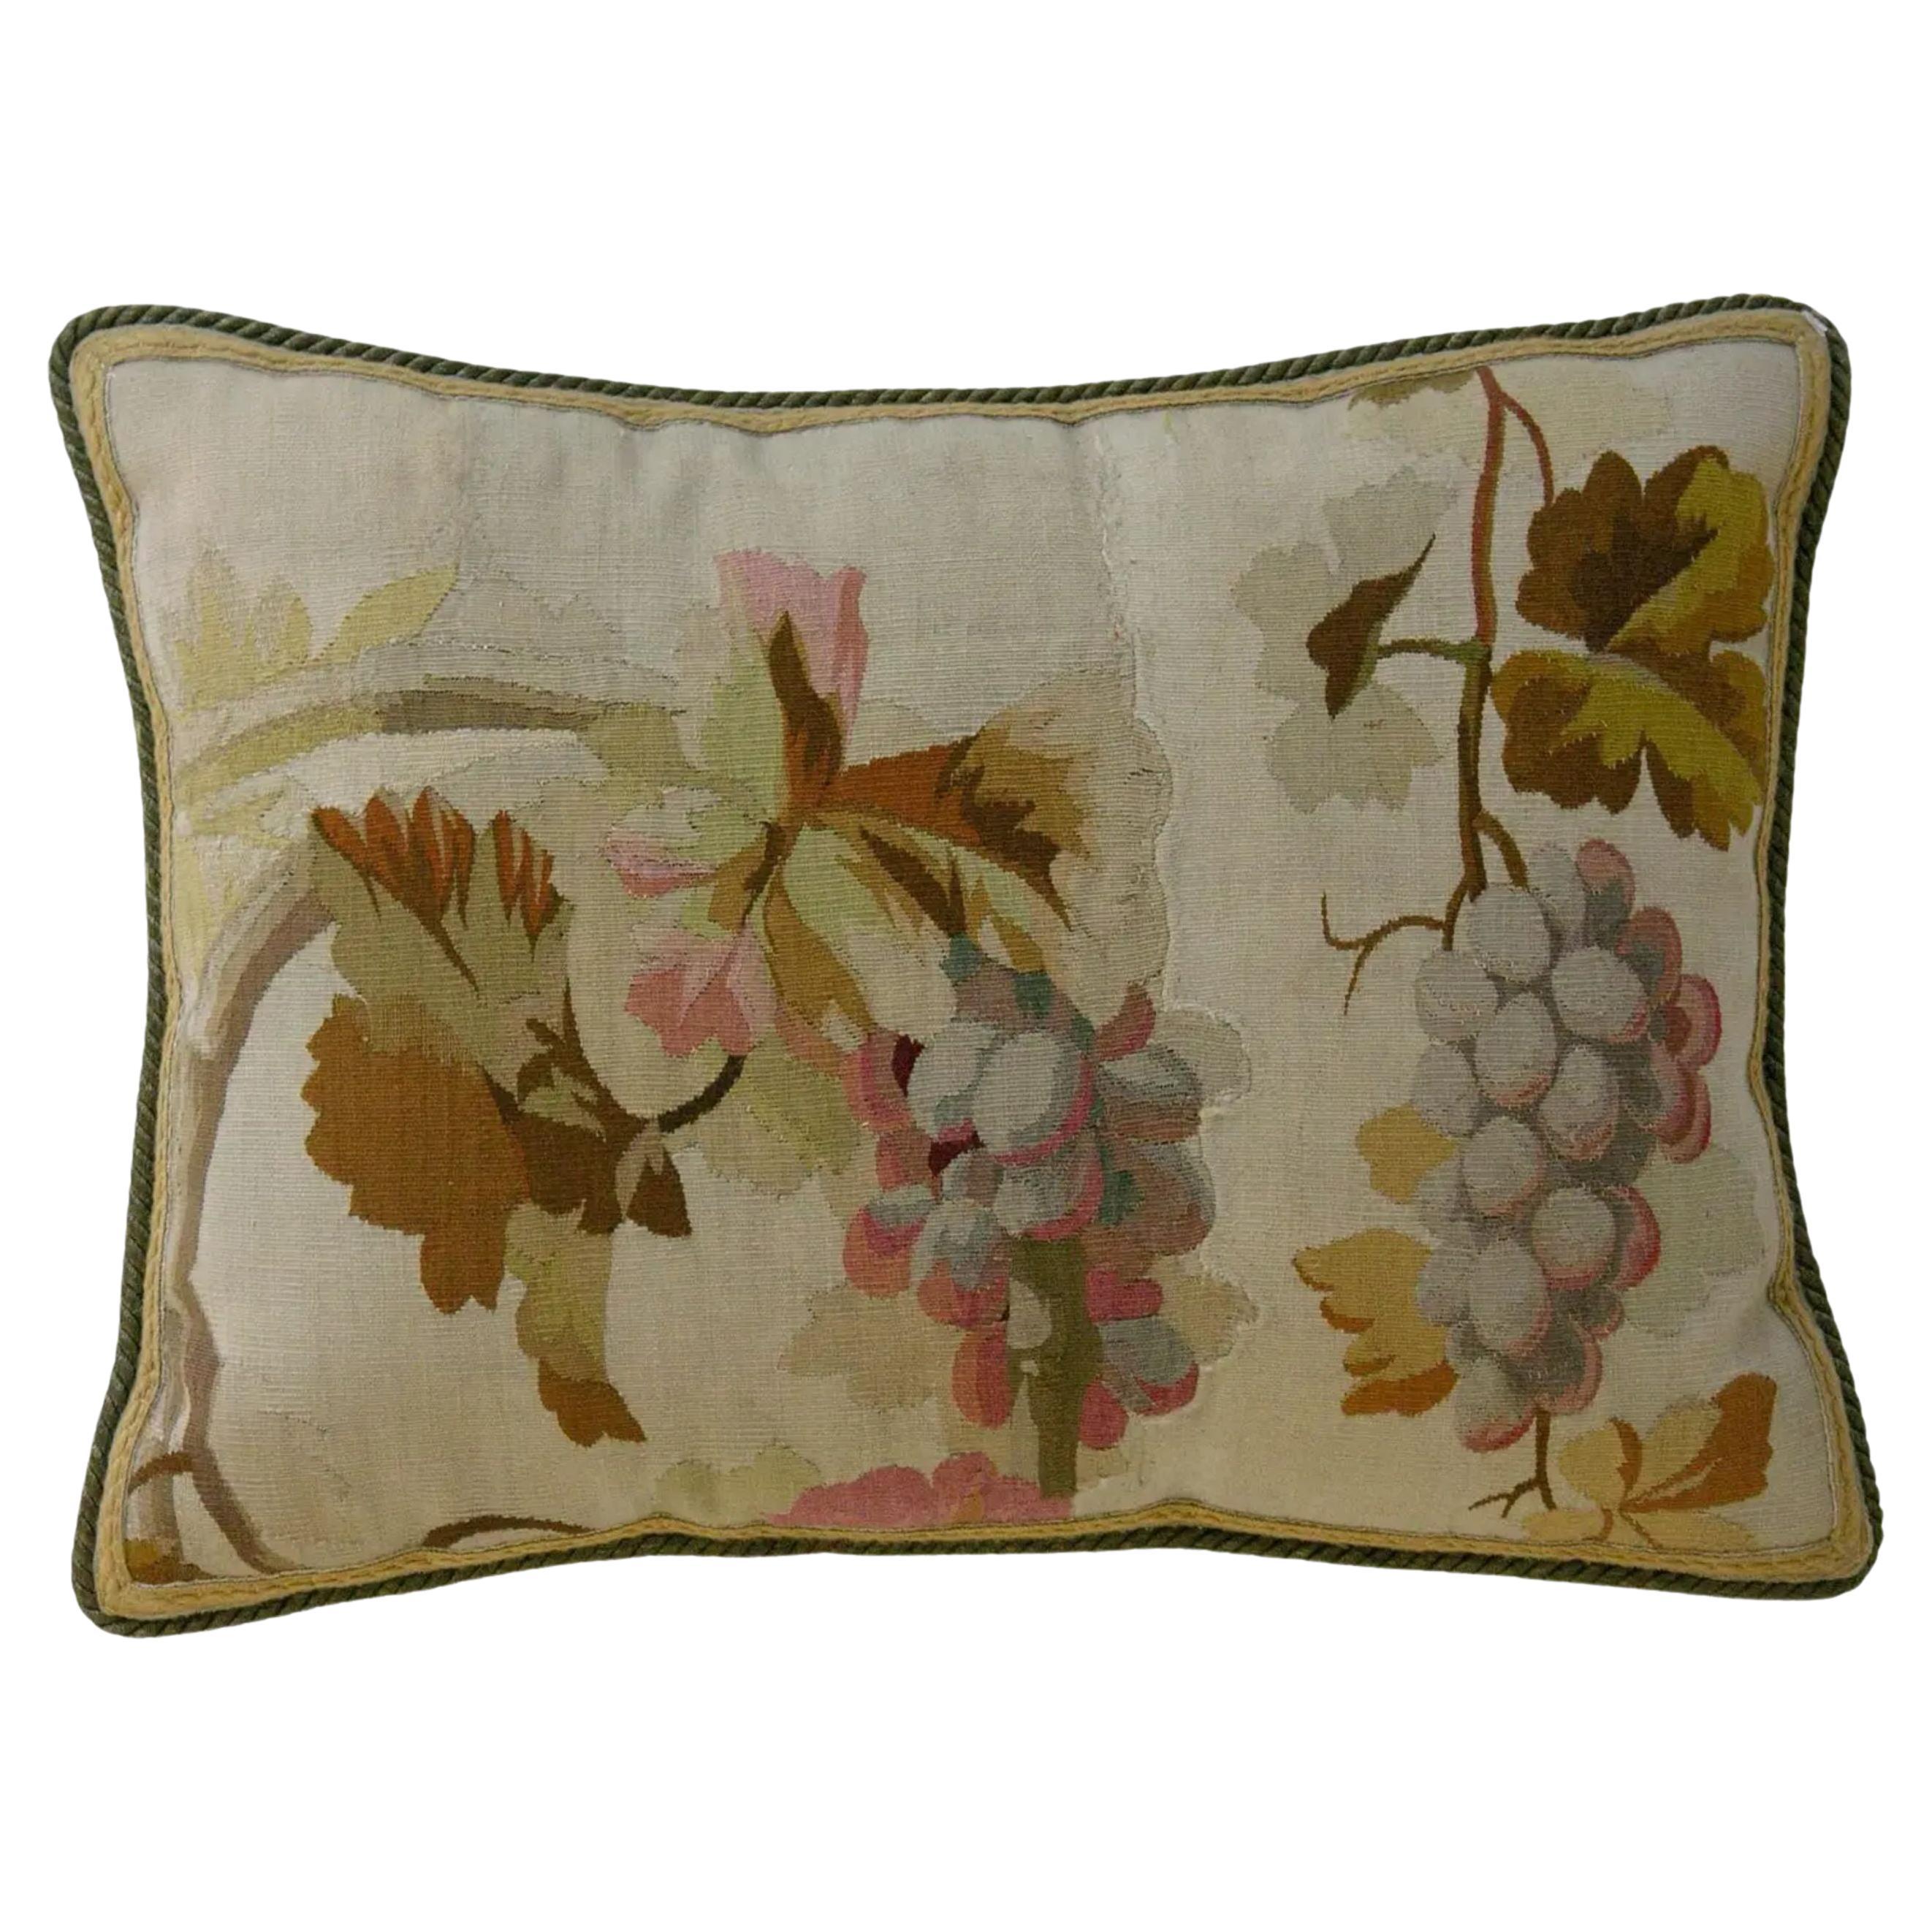 1800 Antique French Aubusson Tapestry Pillow With Grapes on Ivory Background - 2 For Sale